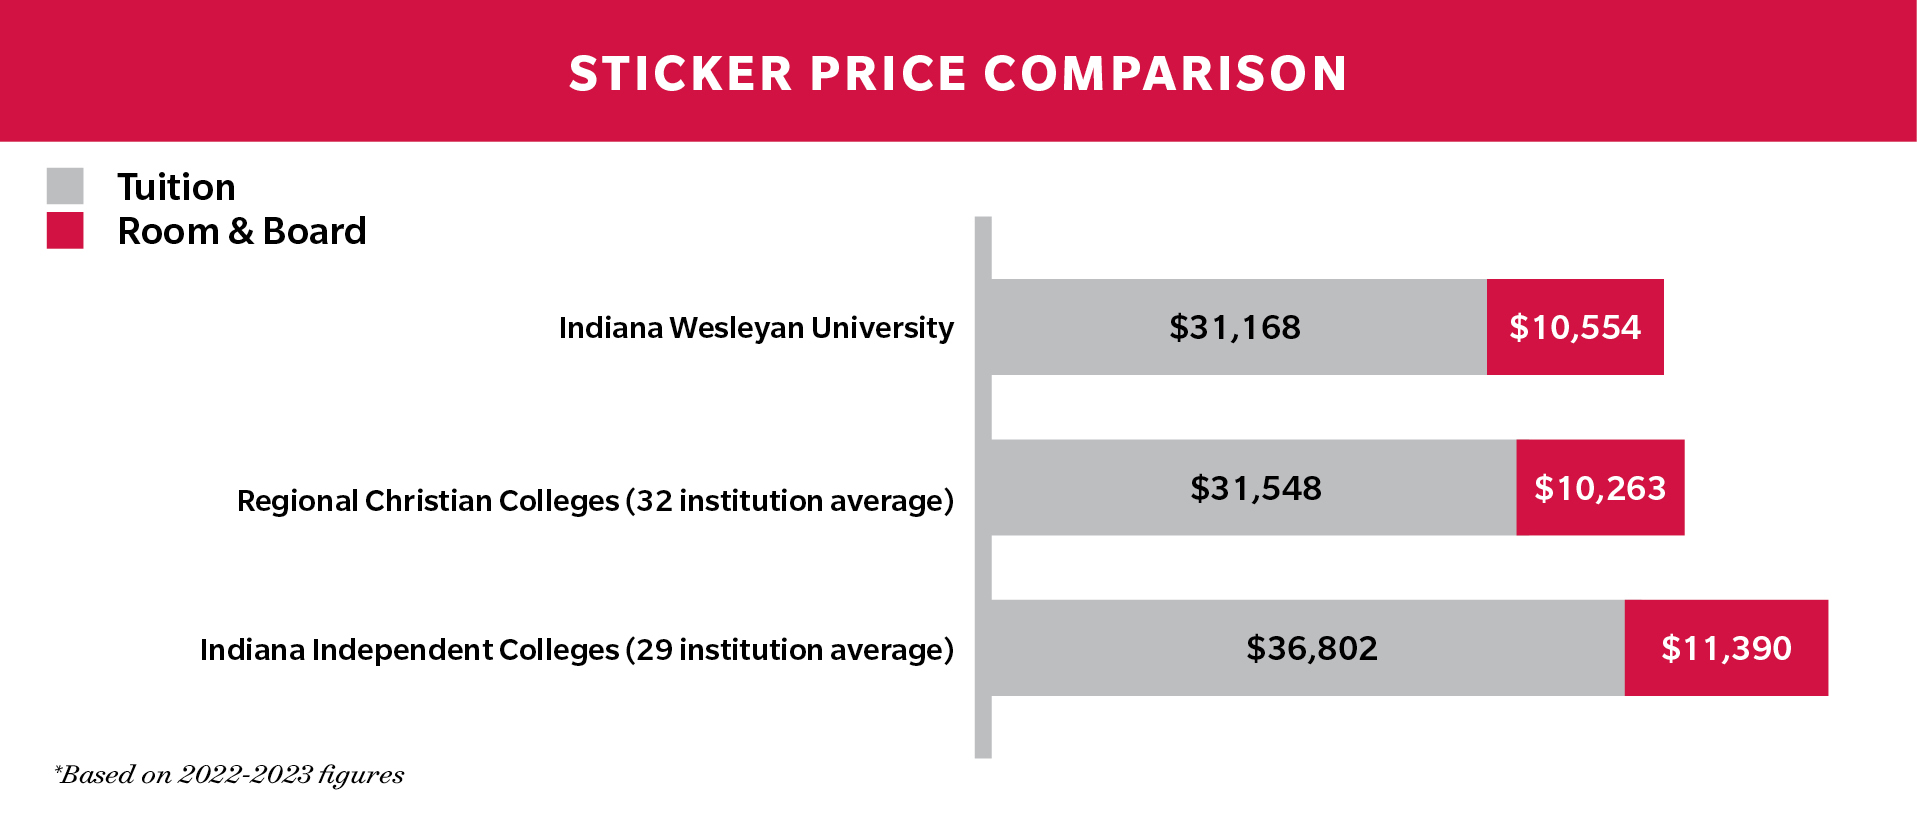 Sticker Price Comparison Graph based on 2022-2023 figures. Indiana Wesleyan University: $31,168 tuition and $10,554 room and board. Regional Christian colleges (an average from 32 institutions): $31,548 tuition and $10,263 room and board. Indiana Independent Colleges (an average from 29 institutions): $36,802 tuition and $11,390 room and board.